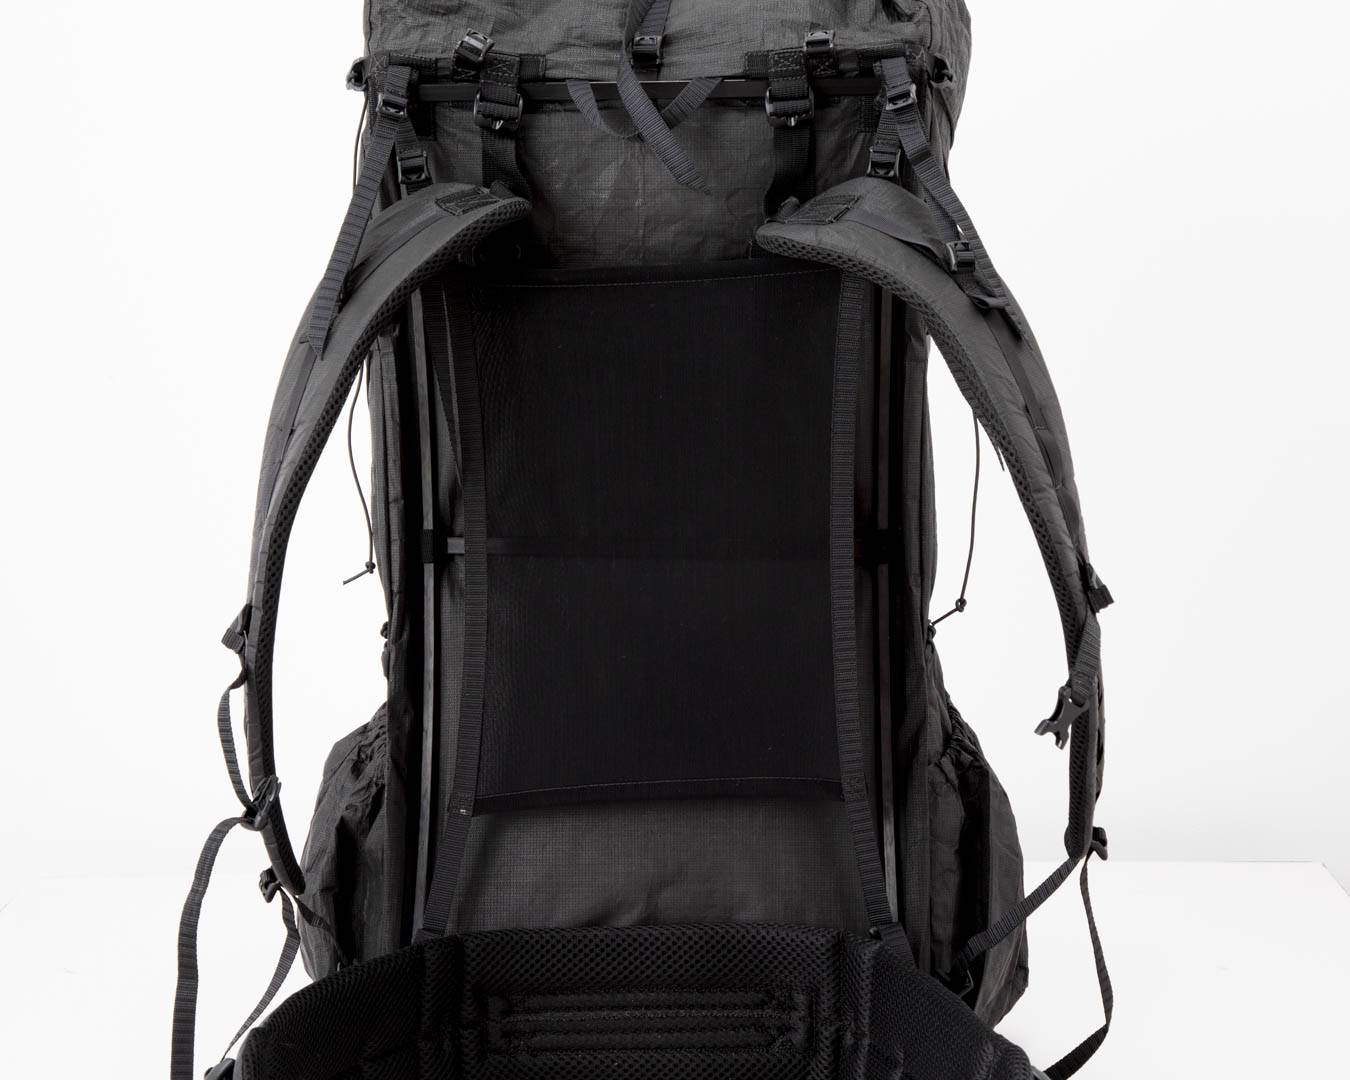 THE BACKPACK TEST 2023現行ULバックパック10種類を背負ってみた（後編 